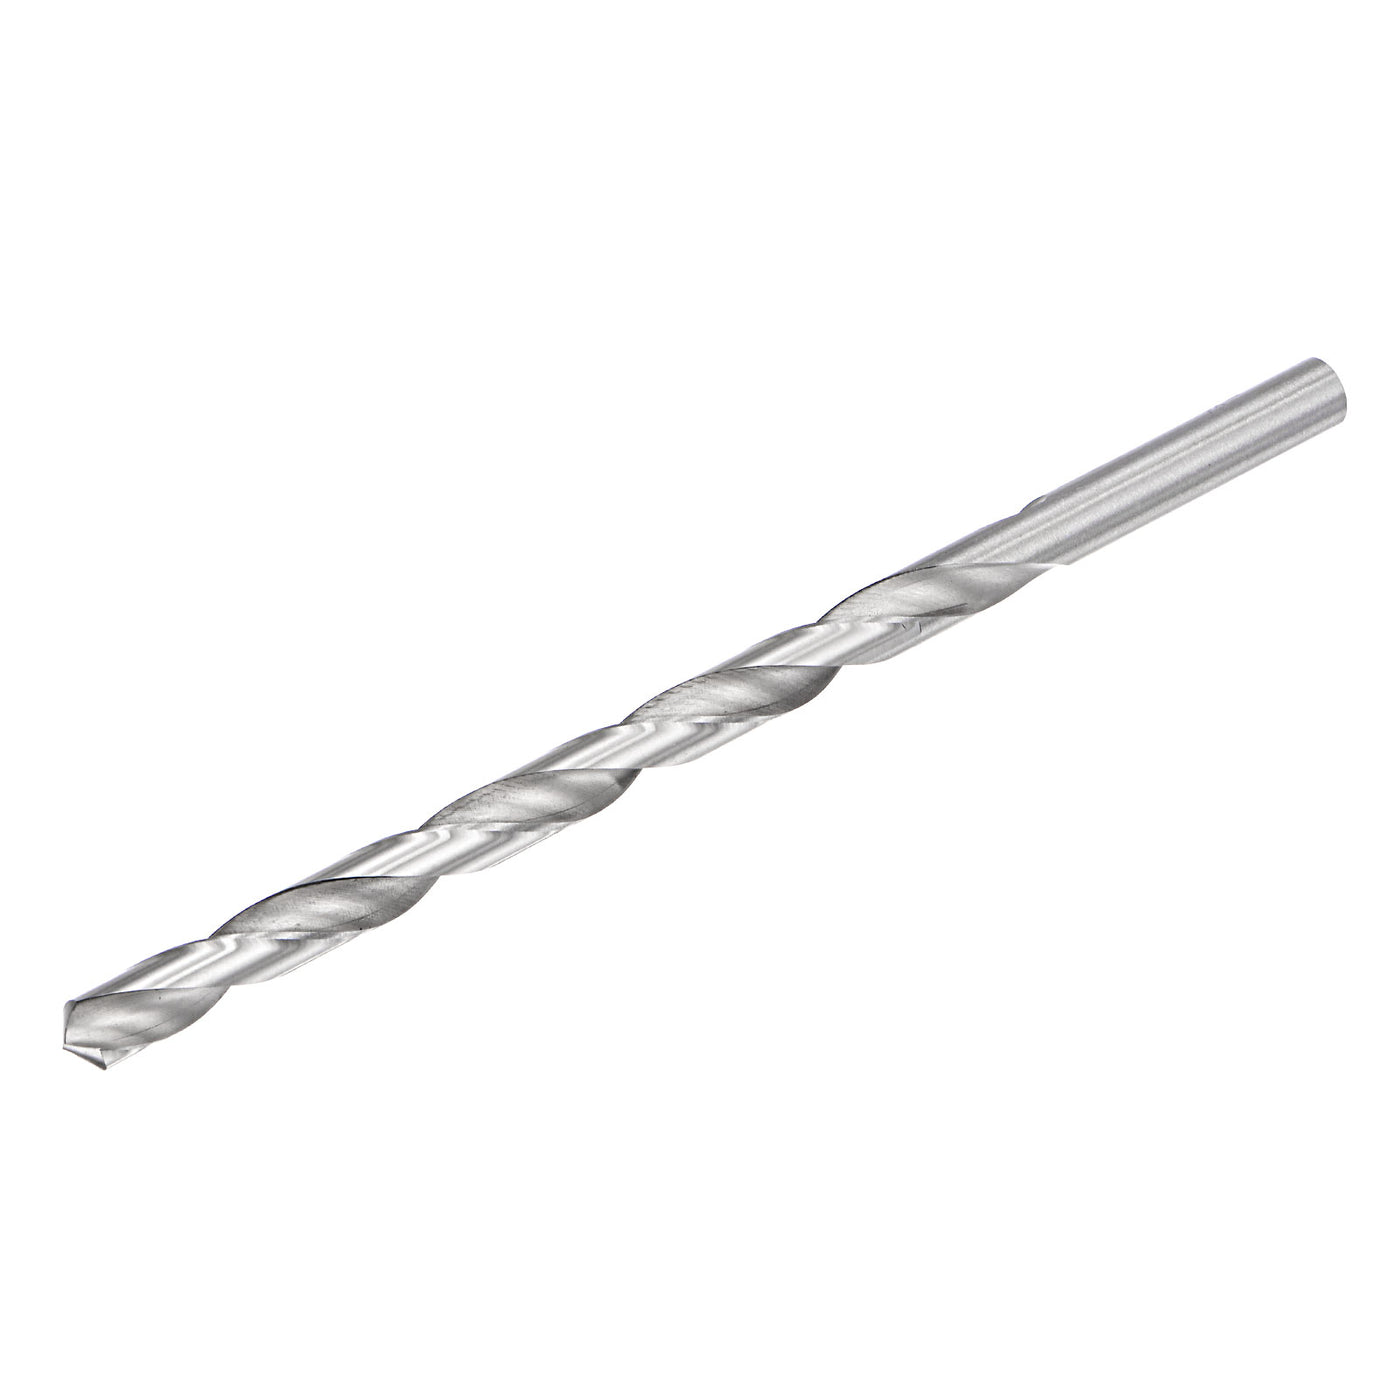 uxcell Uxcell 10mm Twist Drill Bits, High-Speed Steel Extra Long Drill Bit 200mm Length